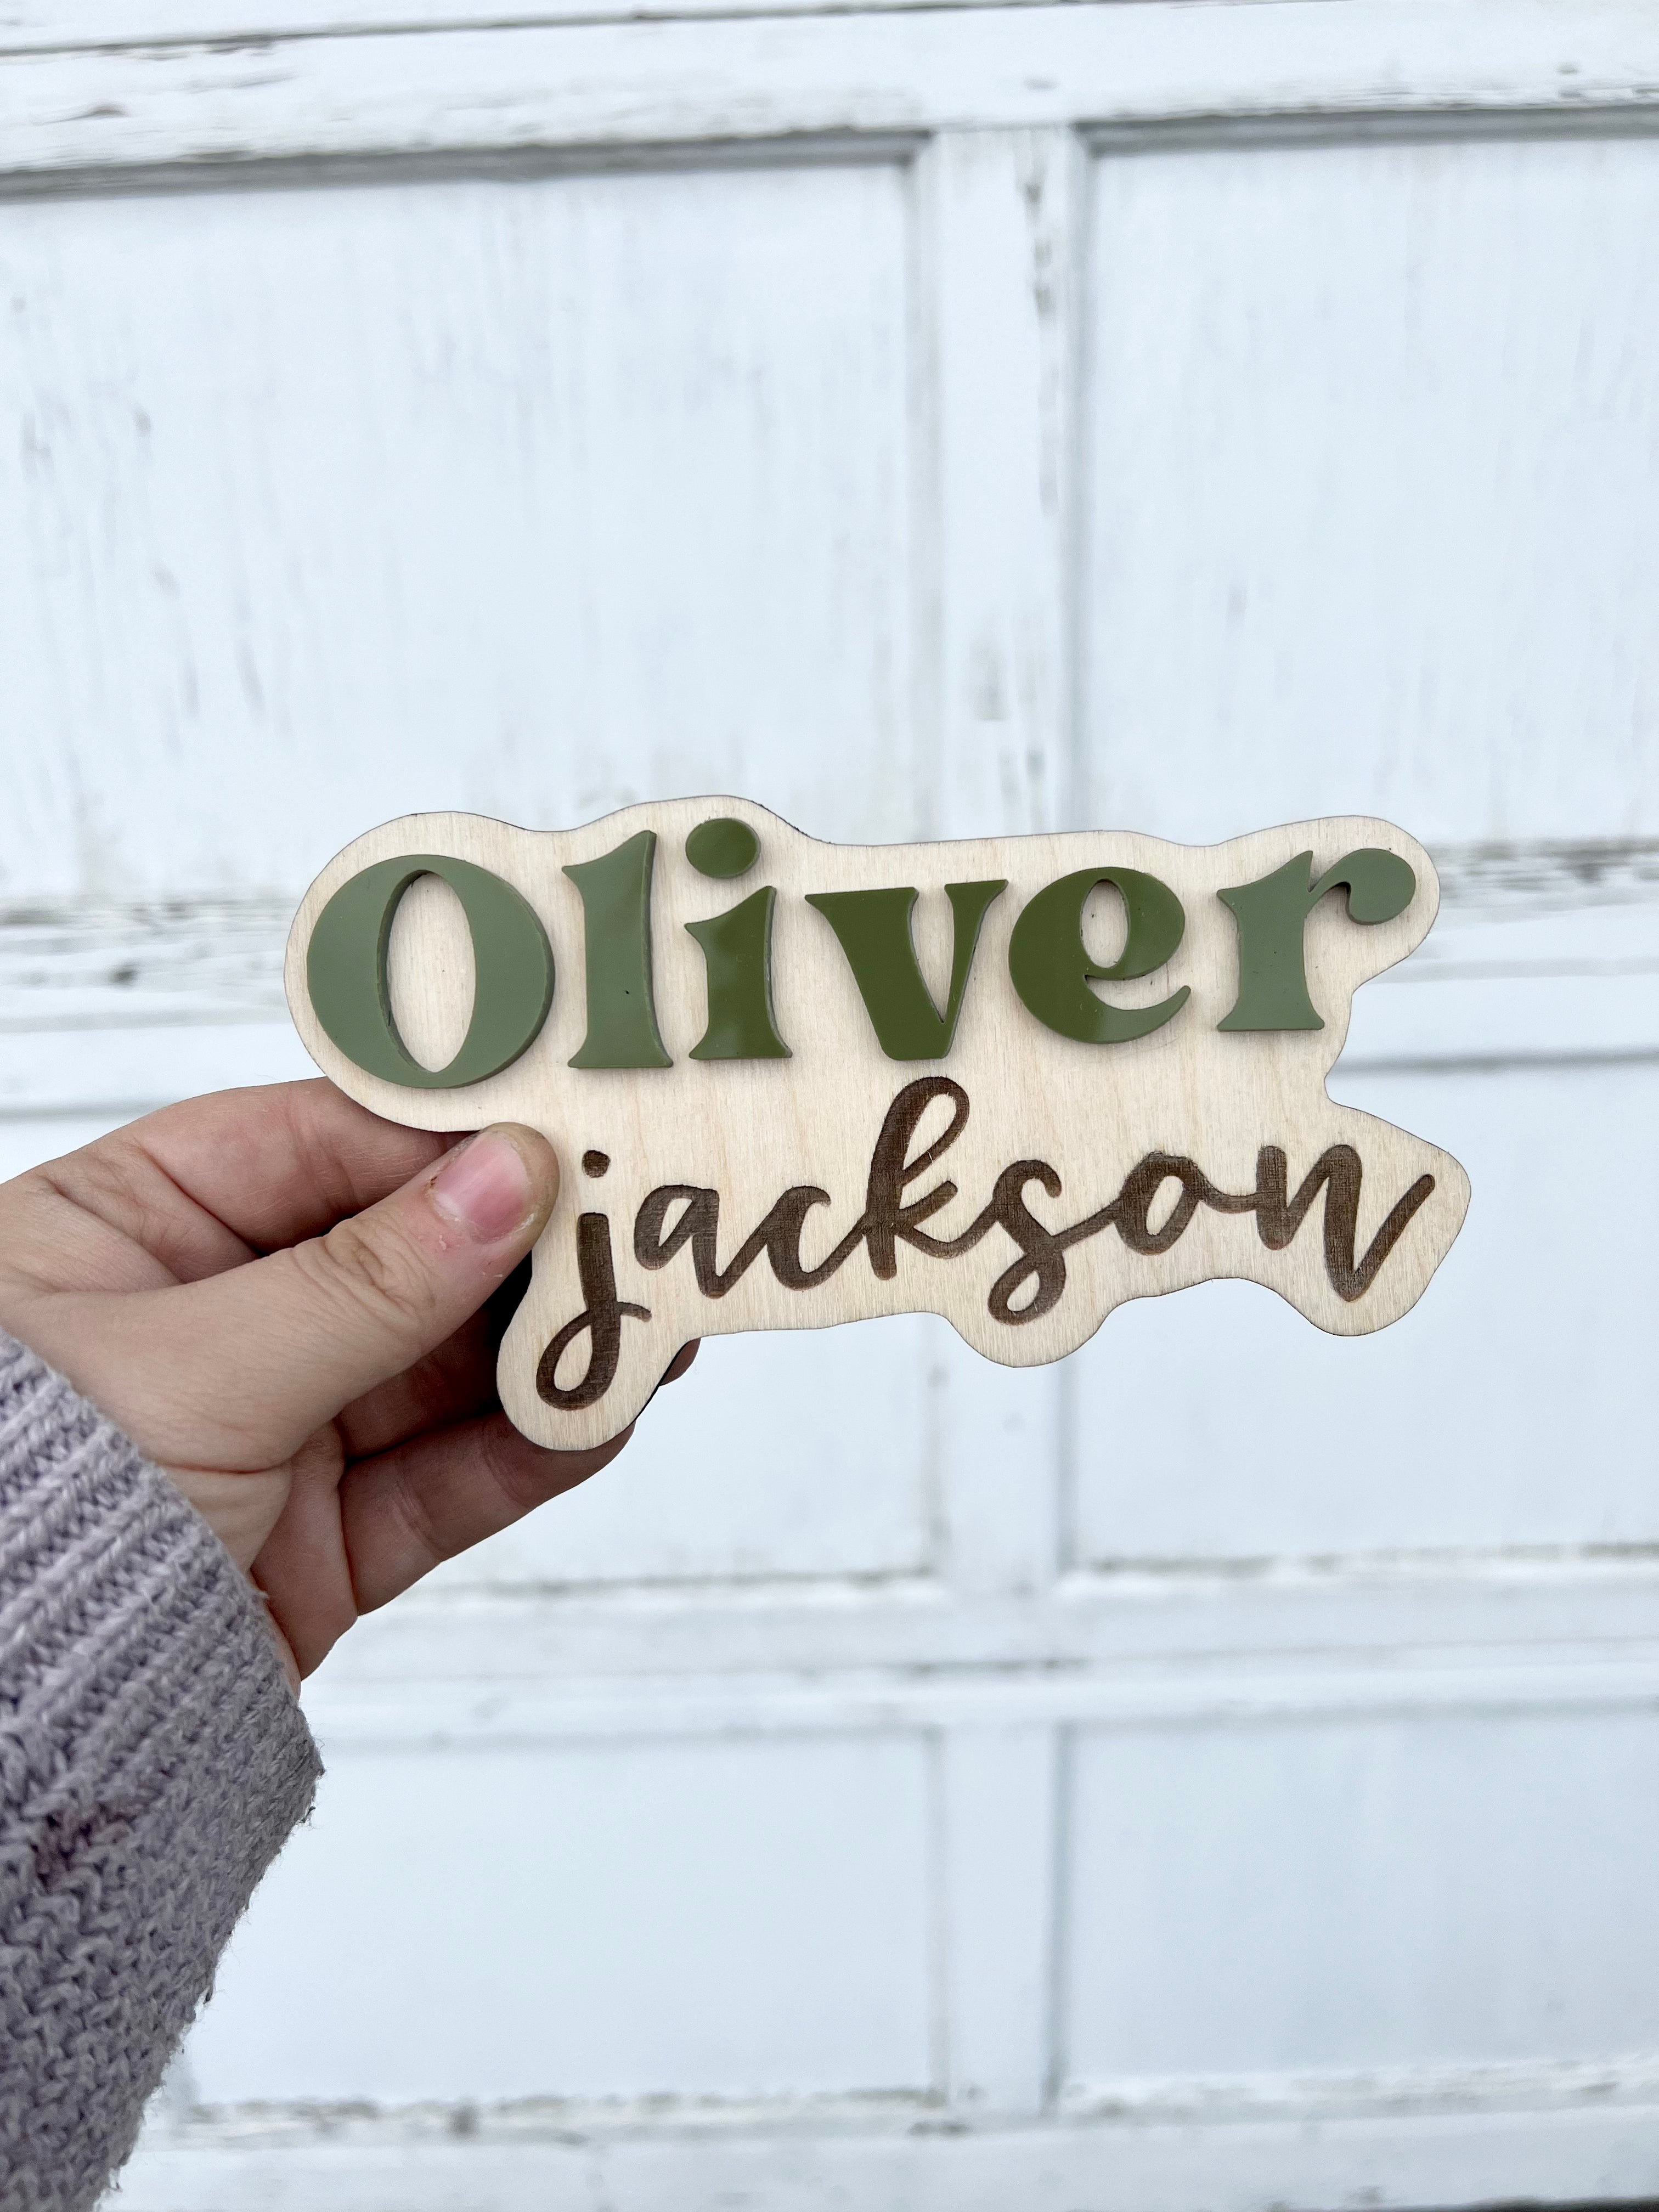 Acrylic and engraved name sign